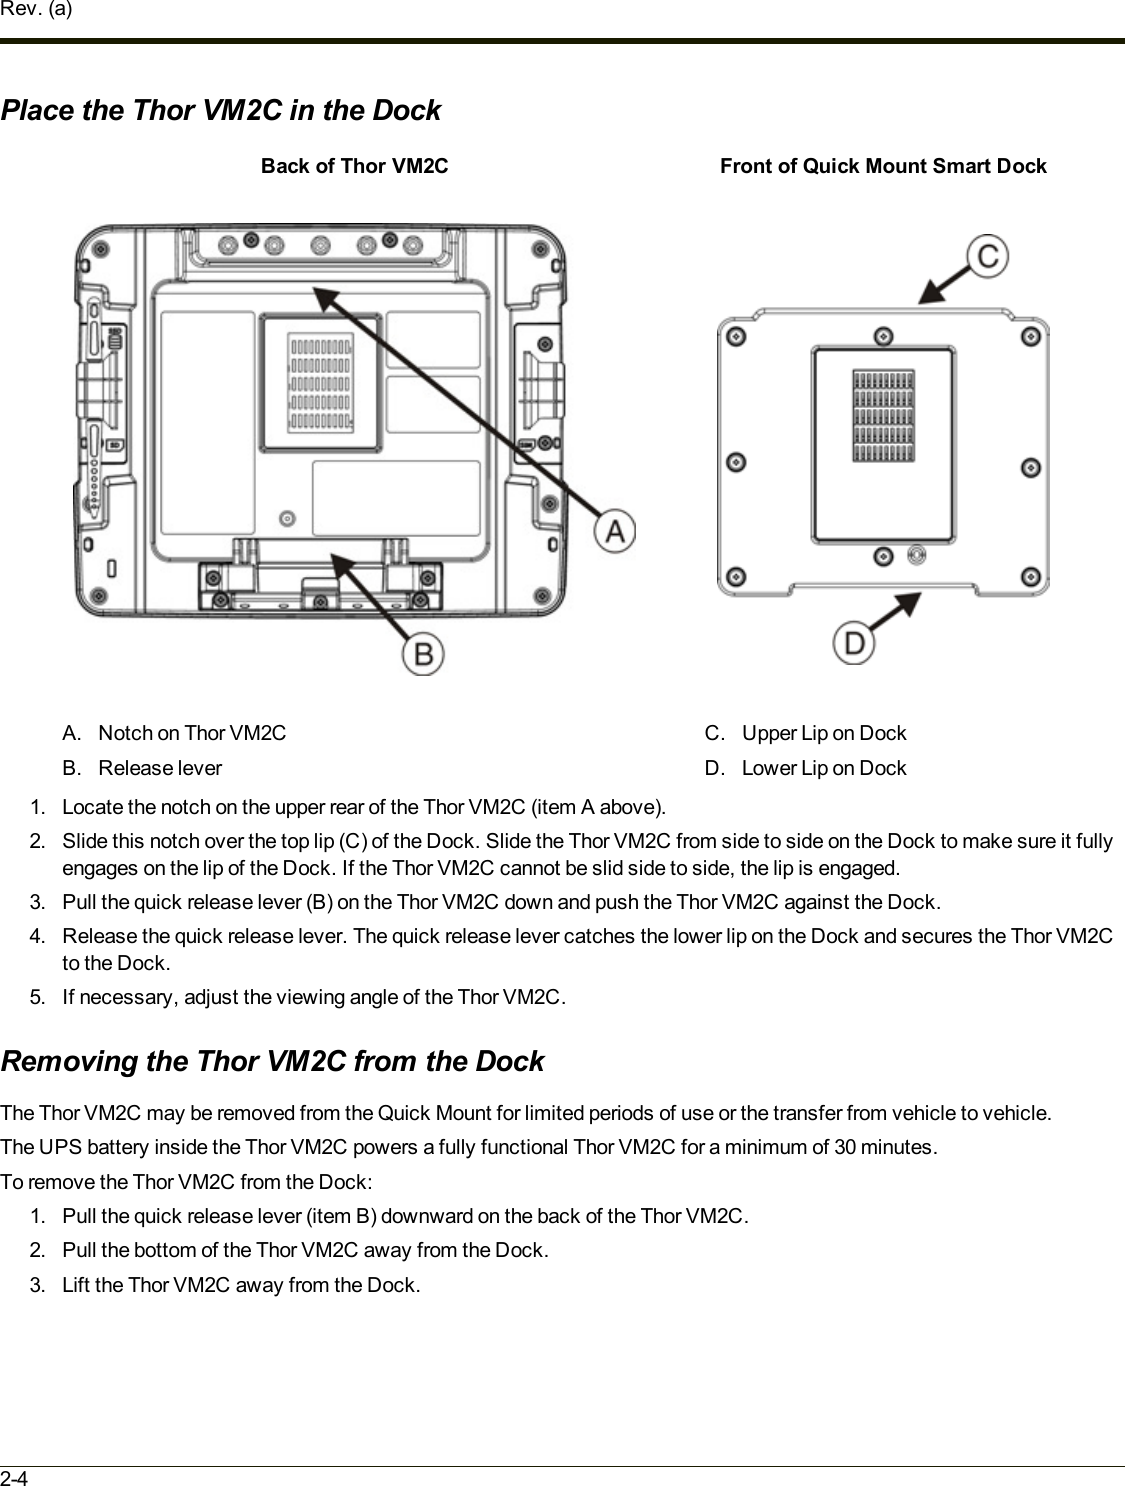 Rev. (a)Place the Thor VM2C in the DockBack of Thor VM2C Front of Quick Mount Smart DockA. Notch on Thor VM2CB. Release leverC. Upper Lip on DockD. Lower Lip on Dock1. Locate the notch on the upper rear of the Thor VM2C (item A above).2. Slide this notch over the top lip (C)of the Dock. Slide the Thor VM2C from side to side on the Dock to make sure it fullyengages on the lip of the Dock. If the Thor VM2C cannot be slid side to side, the lip is engaged.3. Pull the quick release lever (B) on the Thor VM2C down and push the Thor VM2C against the Dock.4. Release the quick release lever. The quick release lever catches the lower lip on the Dock and secures the Thor VM2Cto the Dock.5. If necessary, adjust the viewing angle of the Thor VM2C.Removing the Thor VM2C from the DockThe Thor VM2C may be removed from the Quick Mount for limited periods of use or the transfer from vehicle to vehicle.The UPS battery inside the Thor VM2C powers a fully functional Thor VM2C for a minimum of 30 minutes.To remove the Thor VM2C from the Dock:1. Pull the quick release lever (item B) downward on the back of the Thor VM2C.2. Pull the bottom of the Thor VM2C away from the Dock.3. Lift the Thor VM2C away from the Dock.2-4